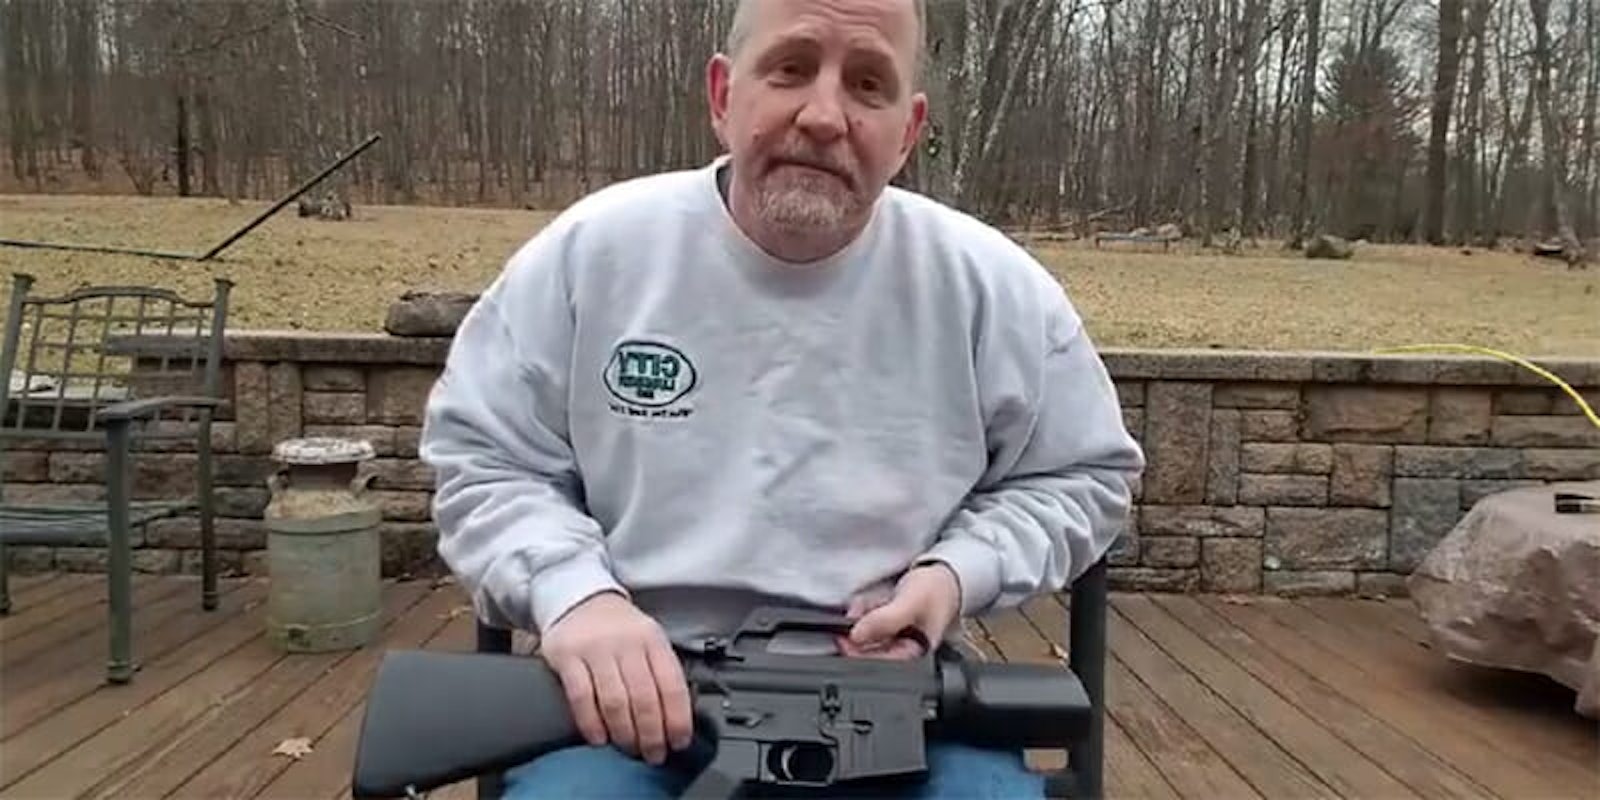 Gun owners, including Scott Pappalardo, are posting videos of themselves destroying their AR-15s and handguns in the wake of the school shooting in Parkland, Florida.